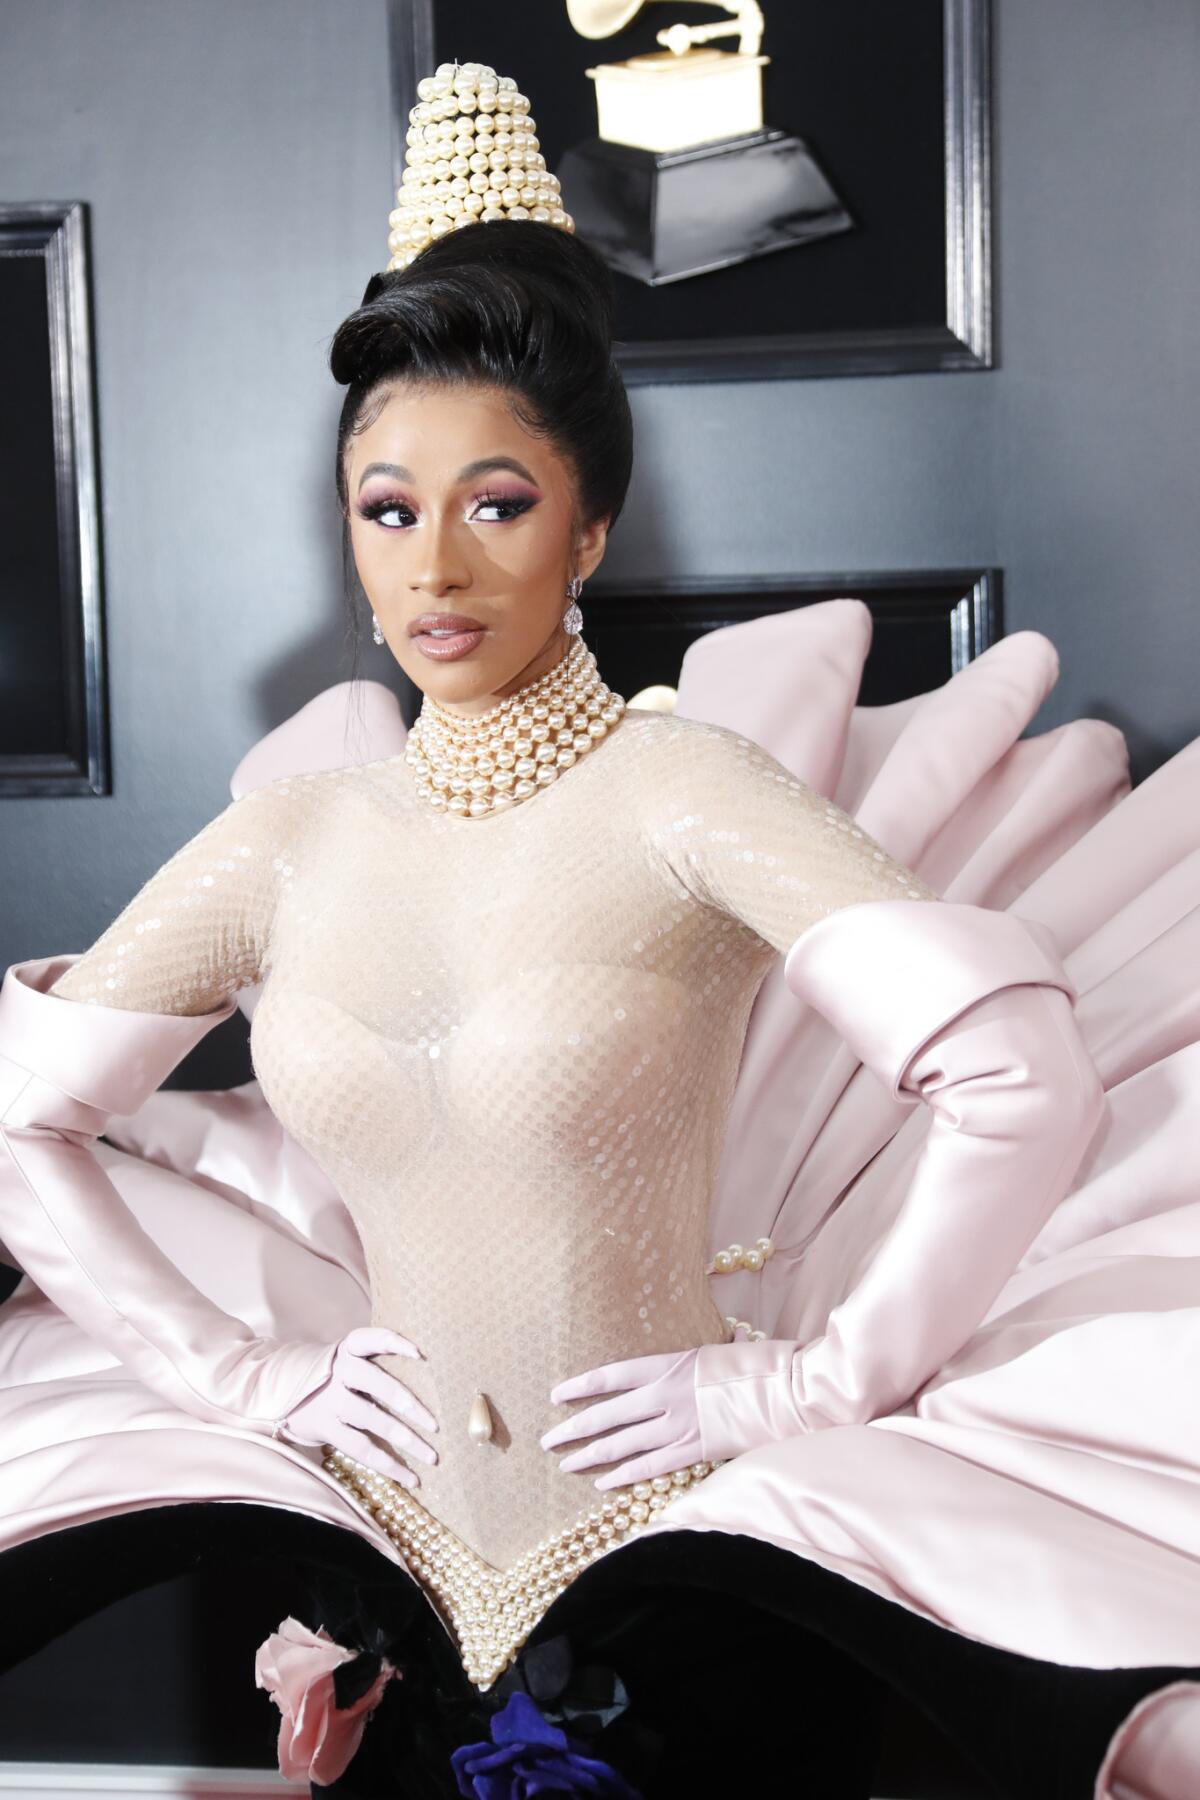 Cardi B during the arrivals at the 61st Grammy Awards.